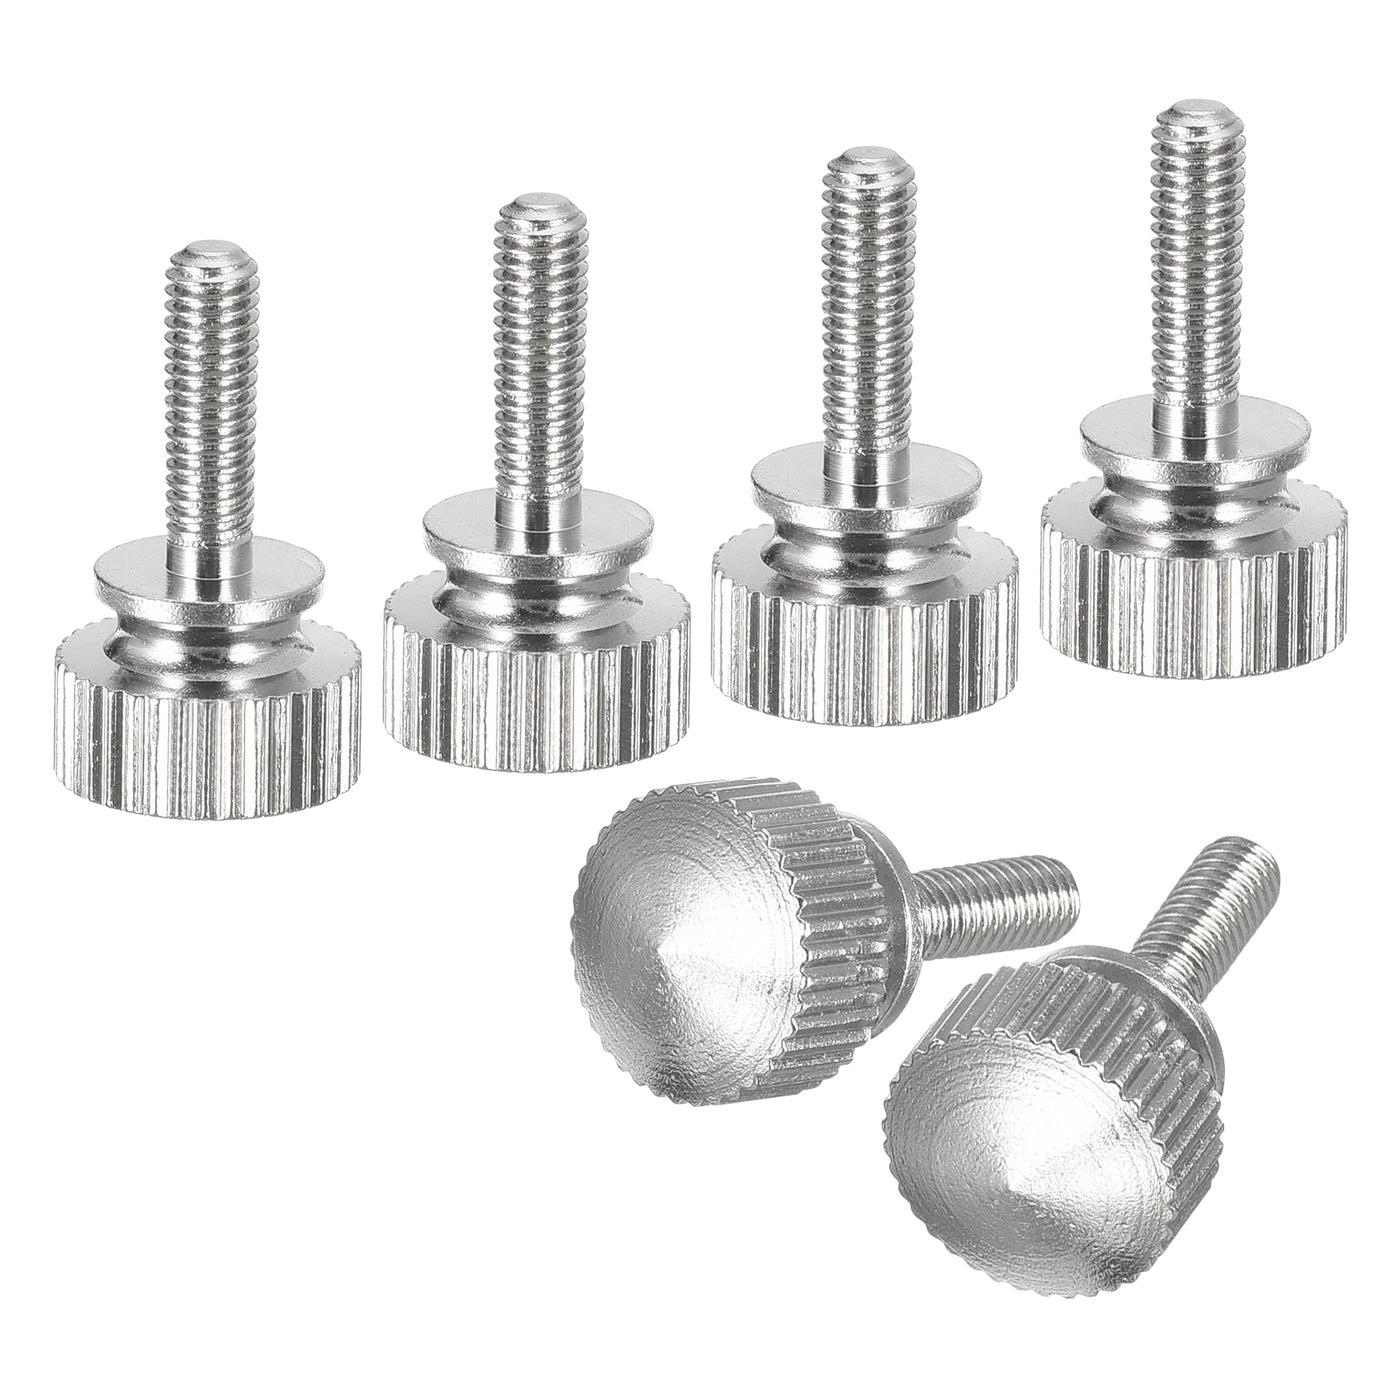 uxcell Uxcell M3x10mm Knurled Thumb Screws, 6pcs Brass Thumb Screws with Shoulder, Silver Tone